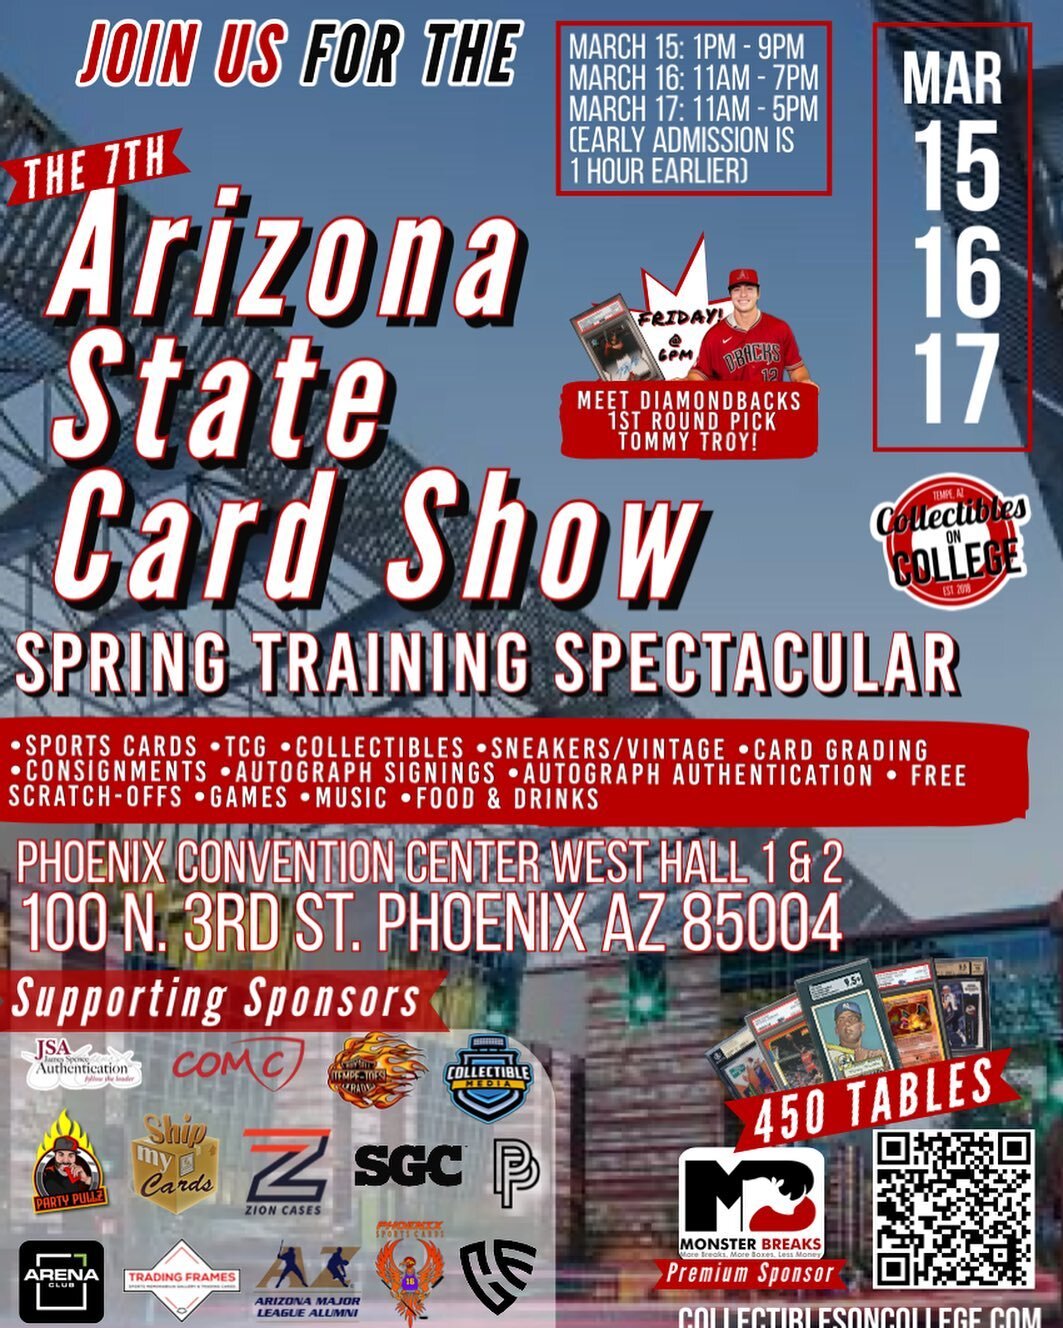 Tomorrow @boxscoreca will be heading to Arizona for the @arizonastatecardshow for the Spring Training Spectacular! Starting on Friday, we will be set up in Booth 24. If you&rsquo;re in the area come by and check us out! Lots of great deals to be had!